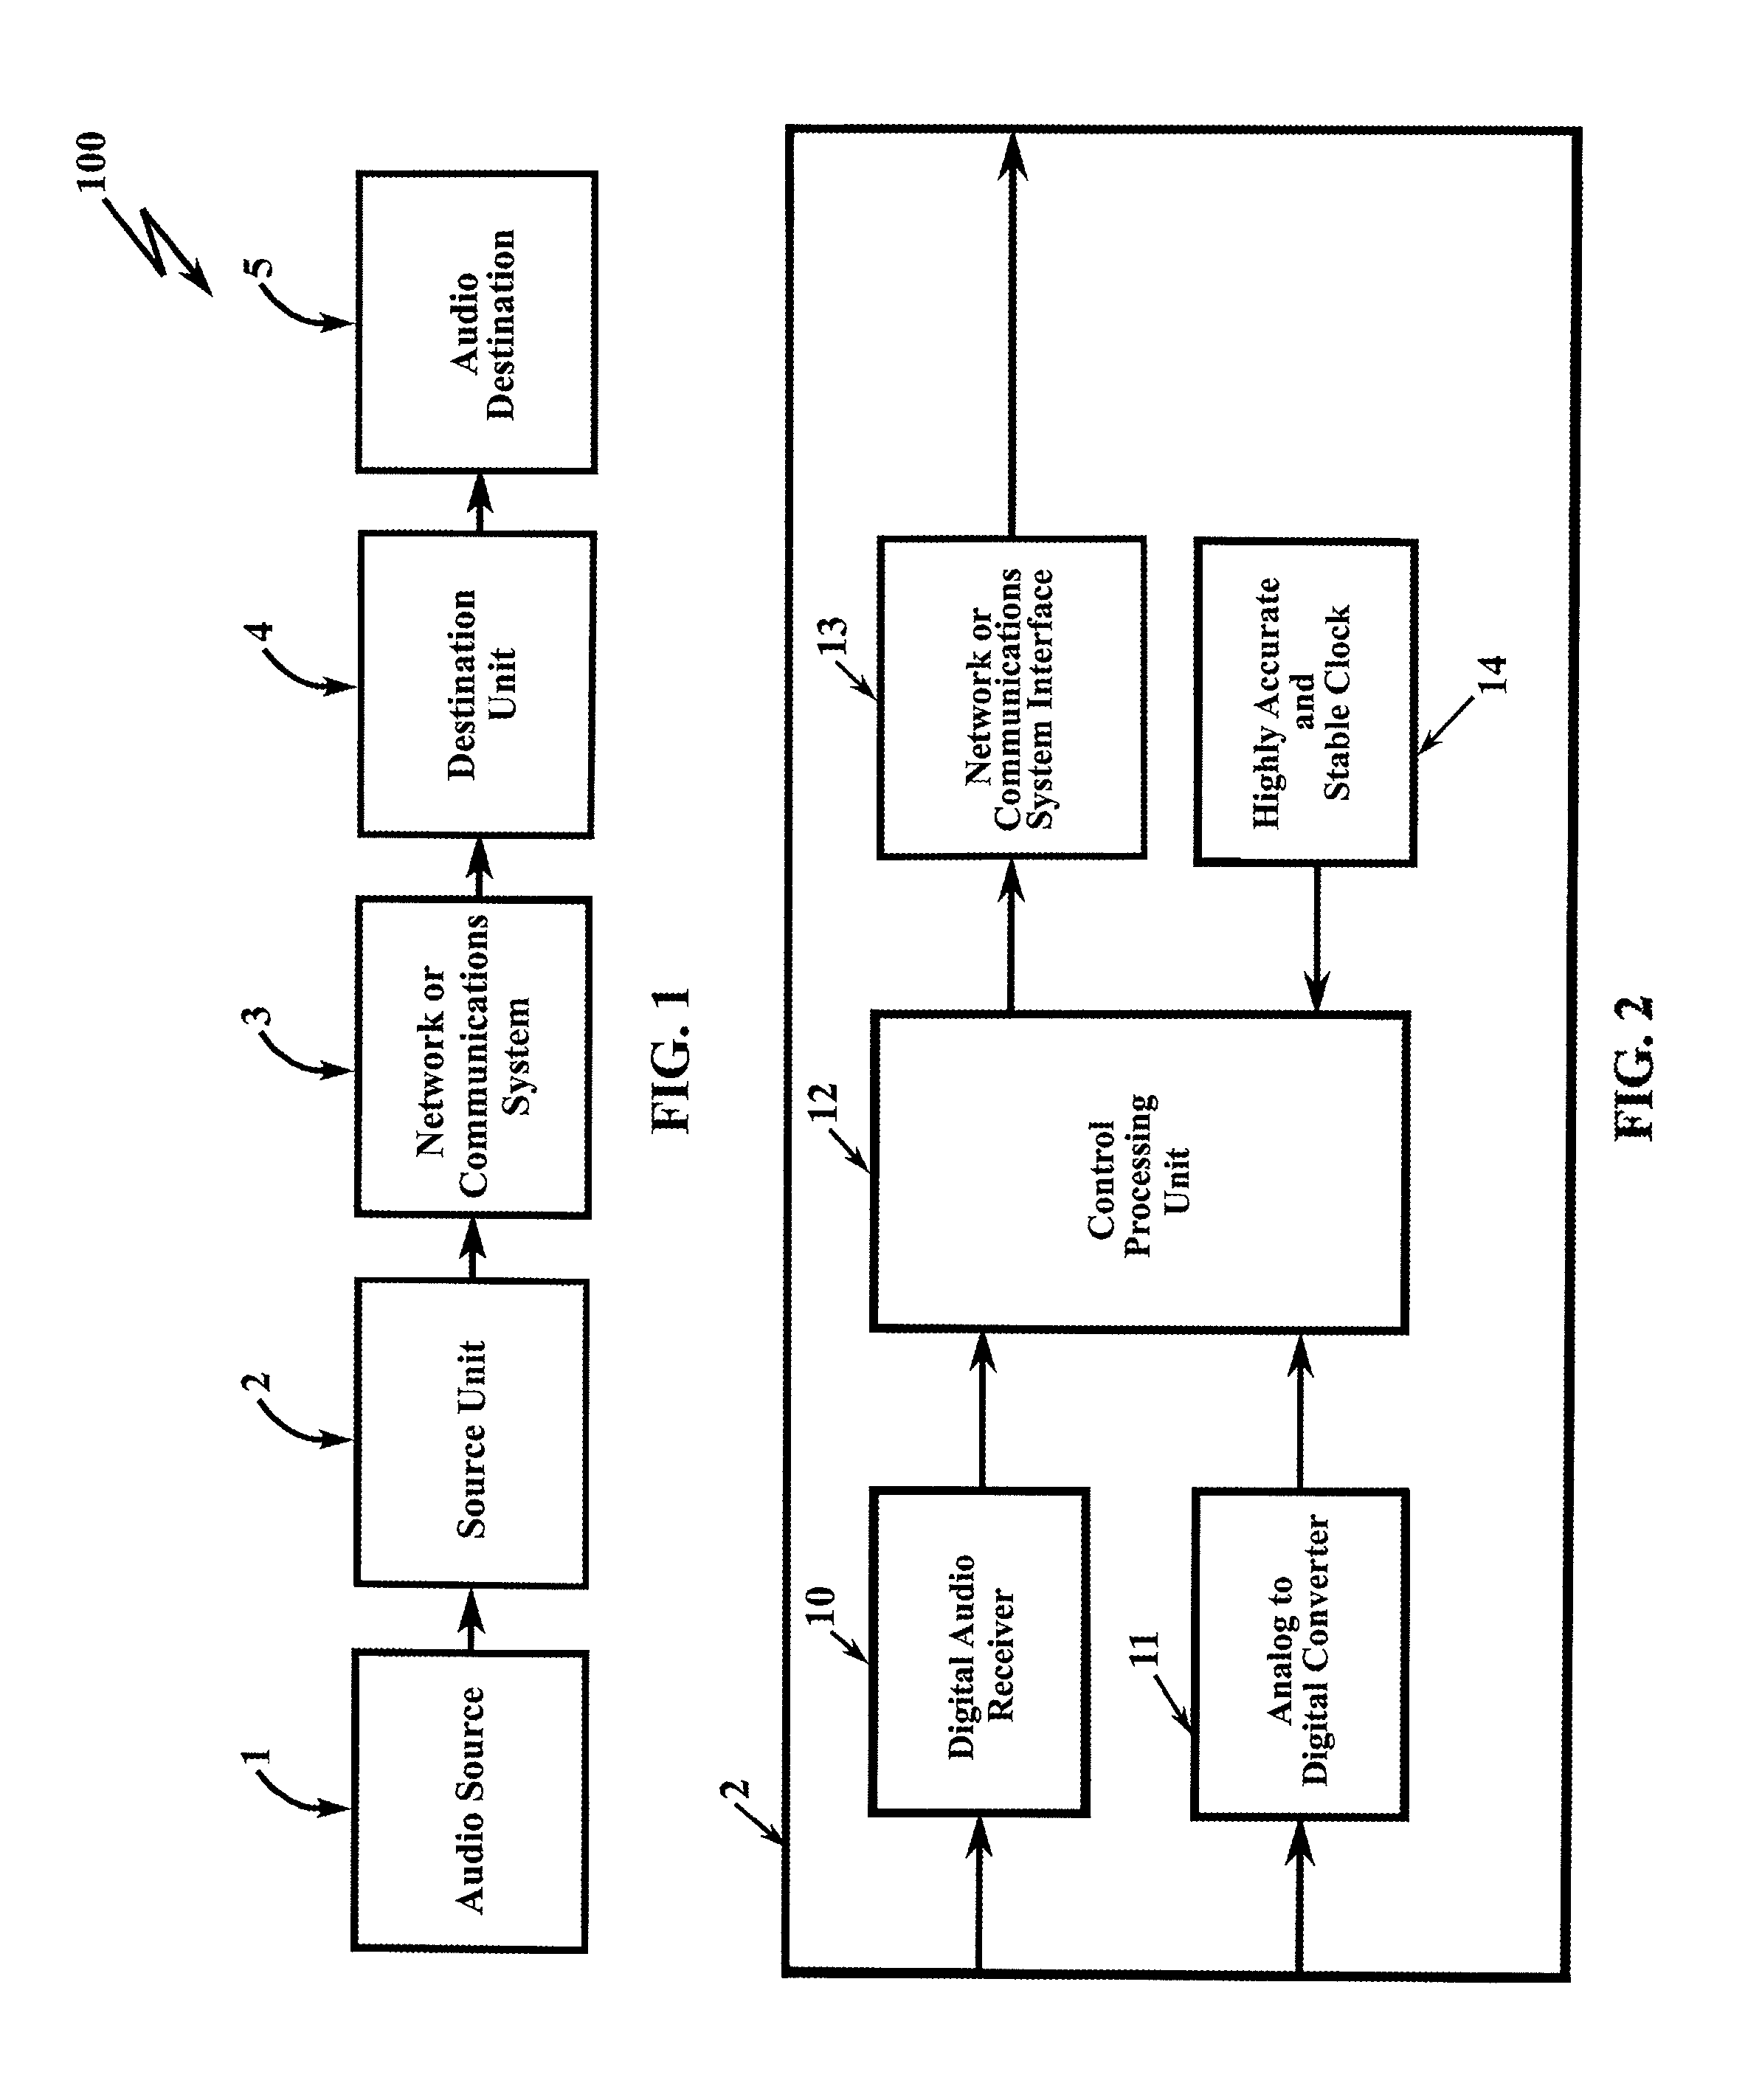 System and method for routing digital audio data using highly stable clocks